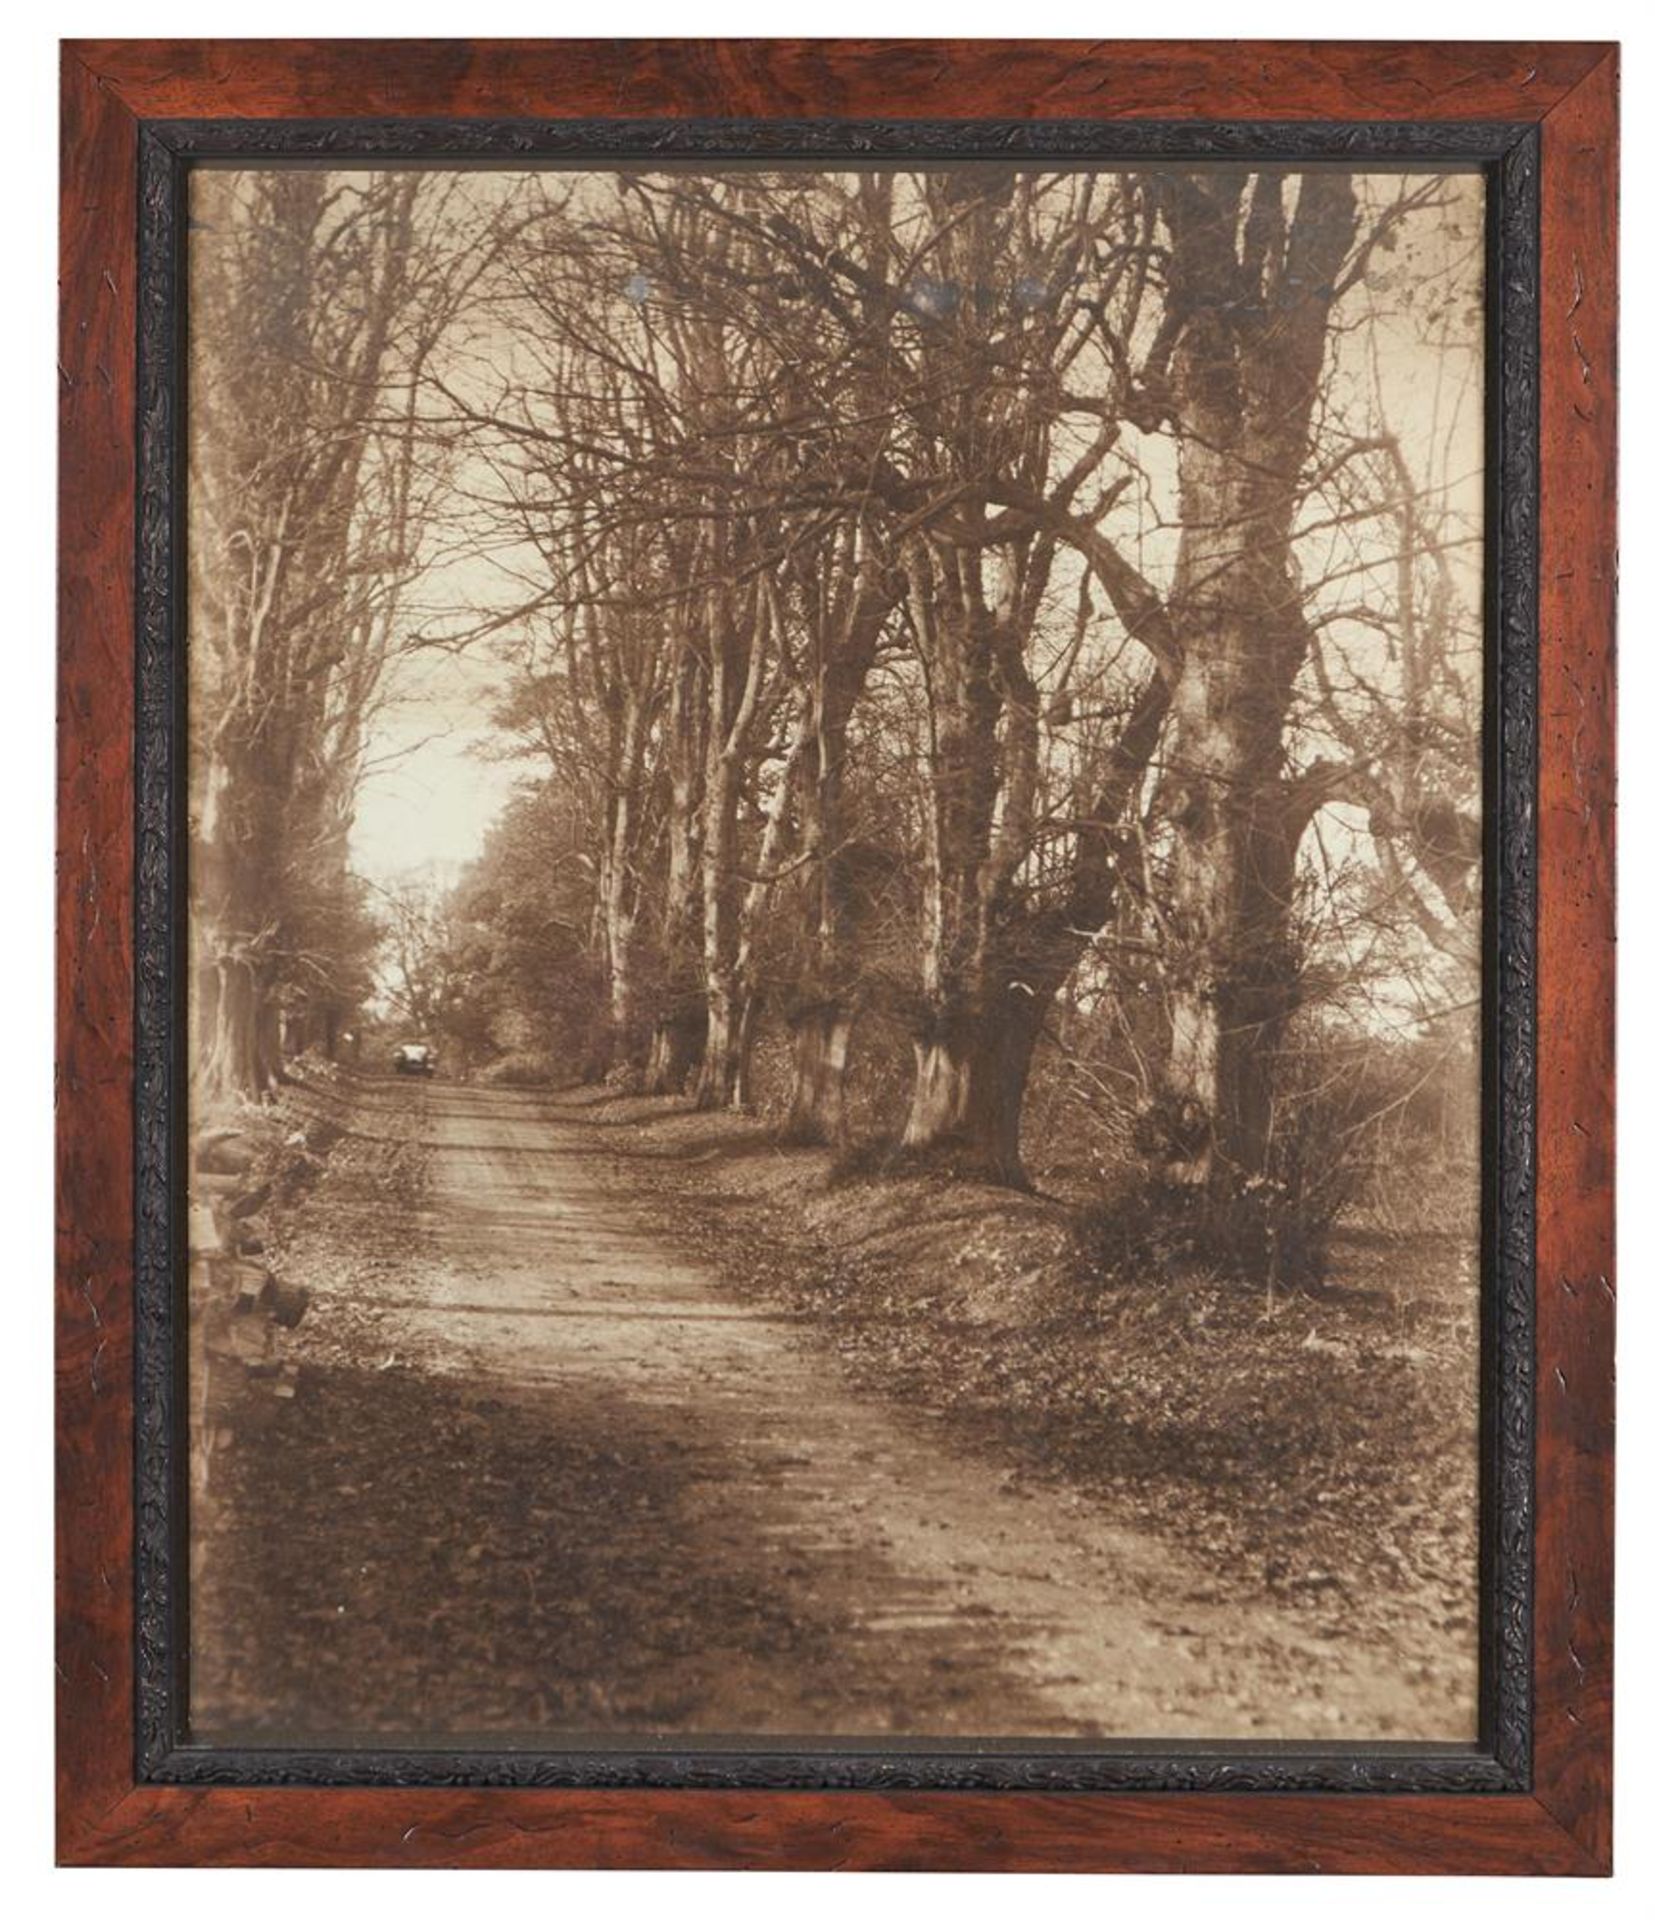 A SET OF THREE SEPIA PHOTOGRAPHIC PRINTS OF TREES - Image 3 of 6